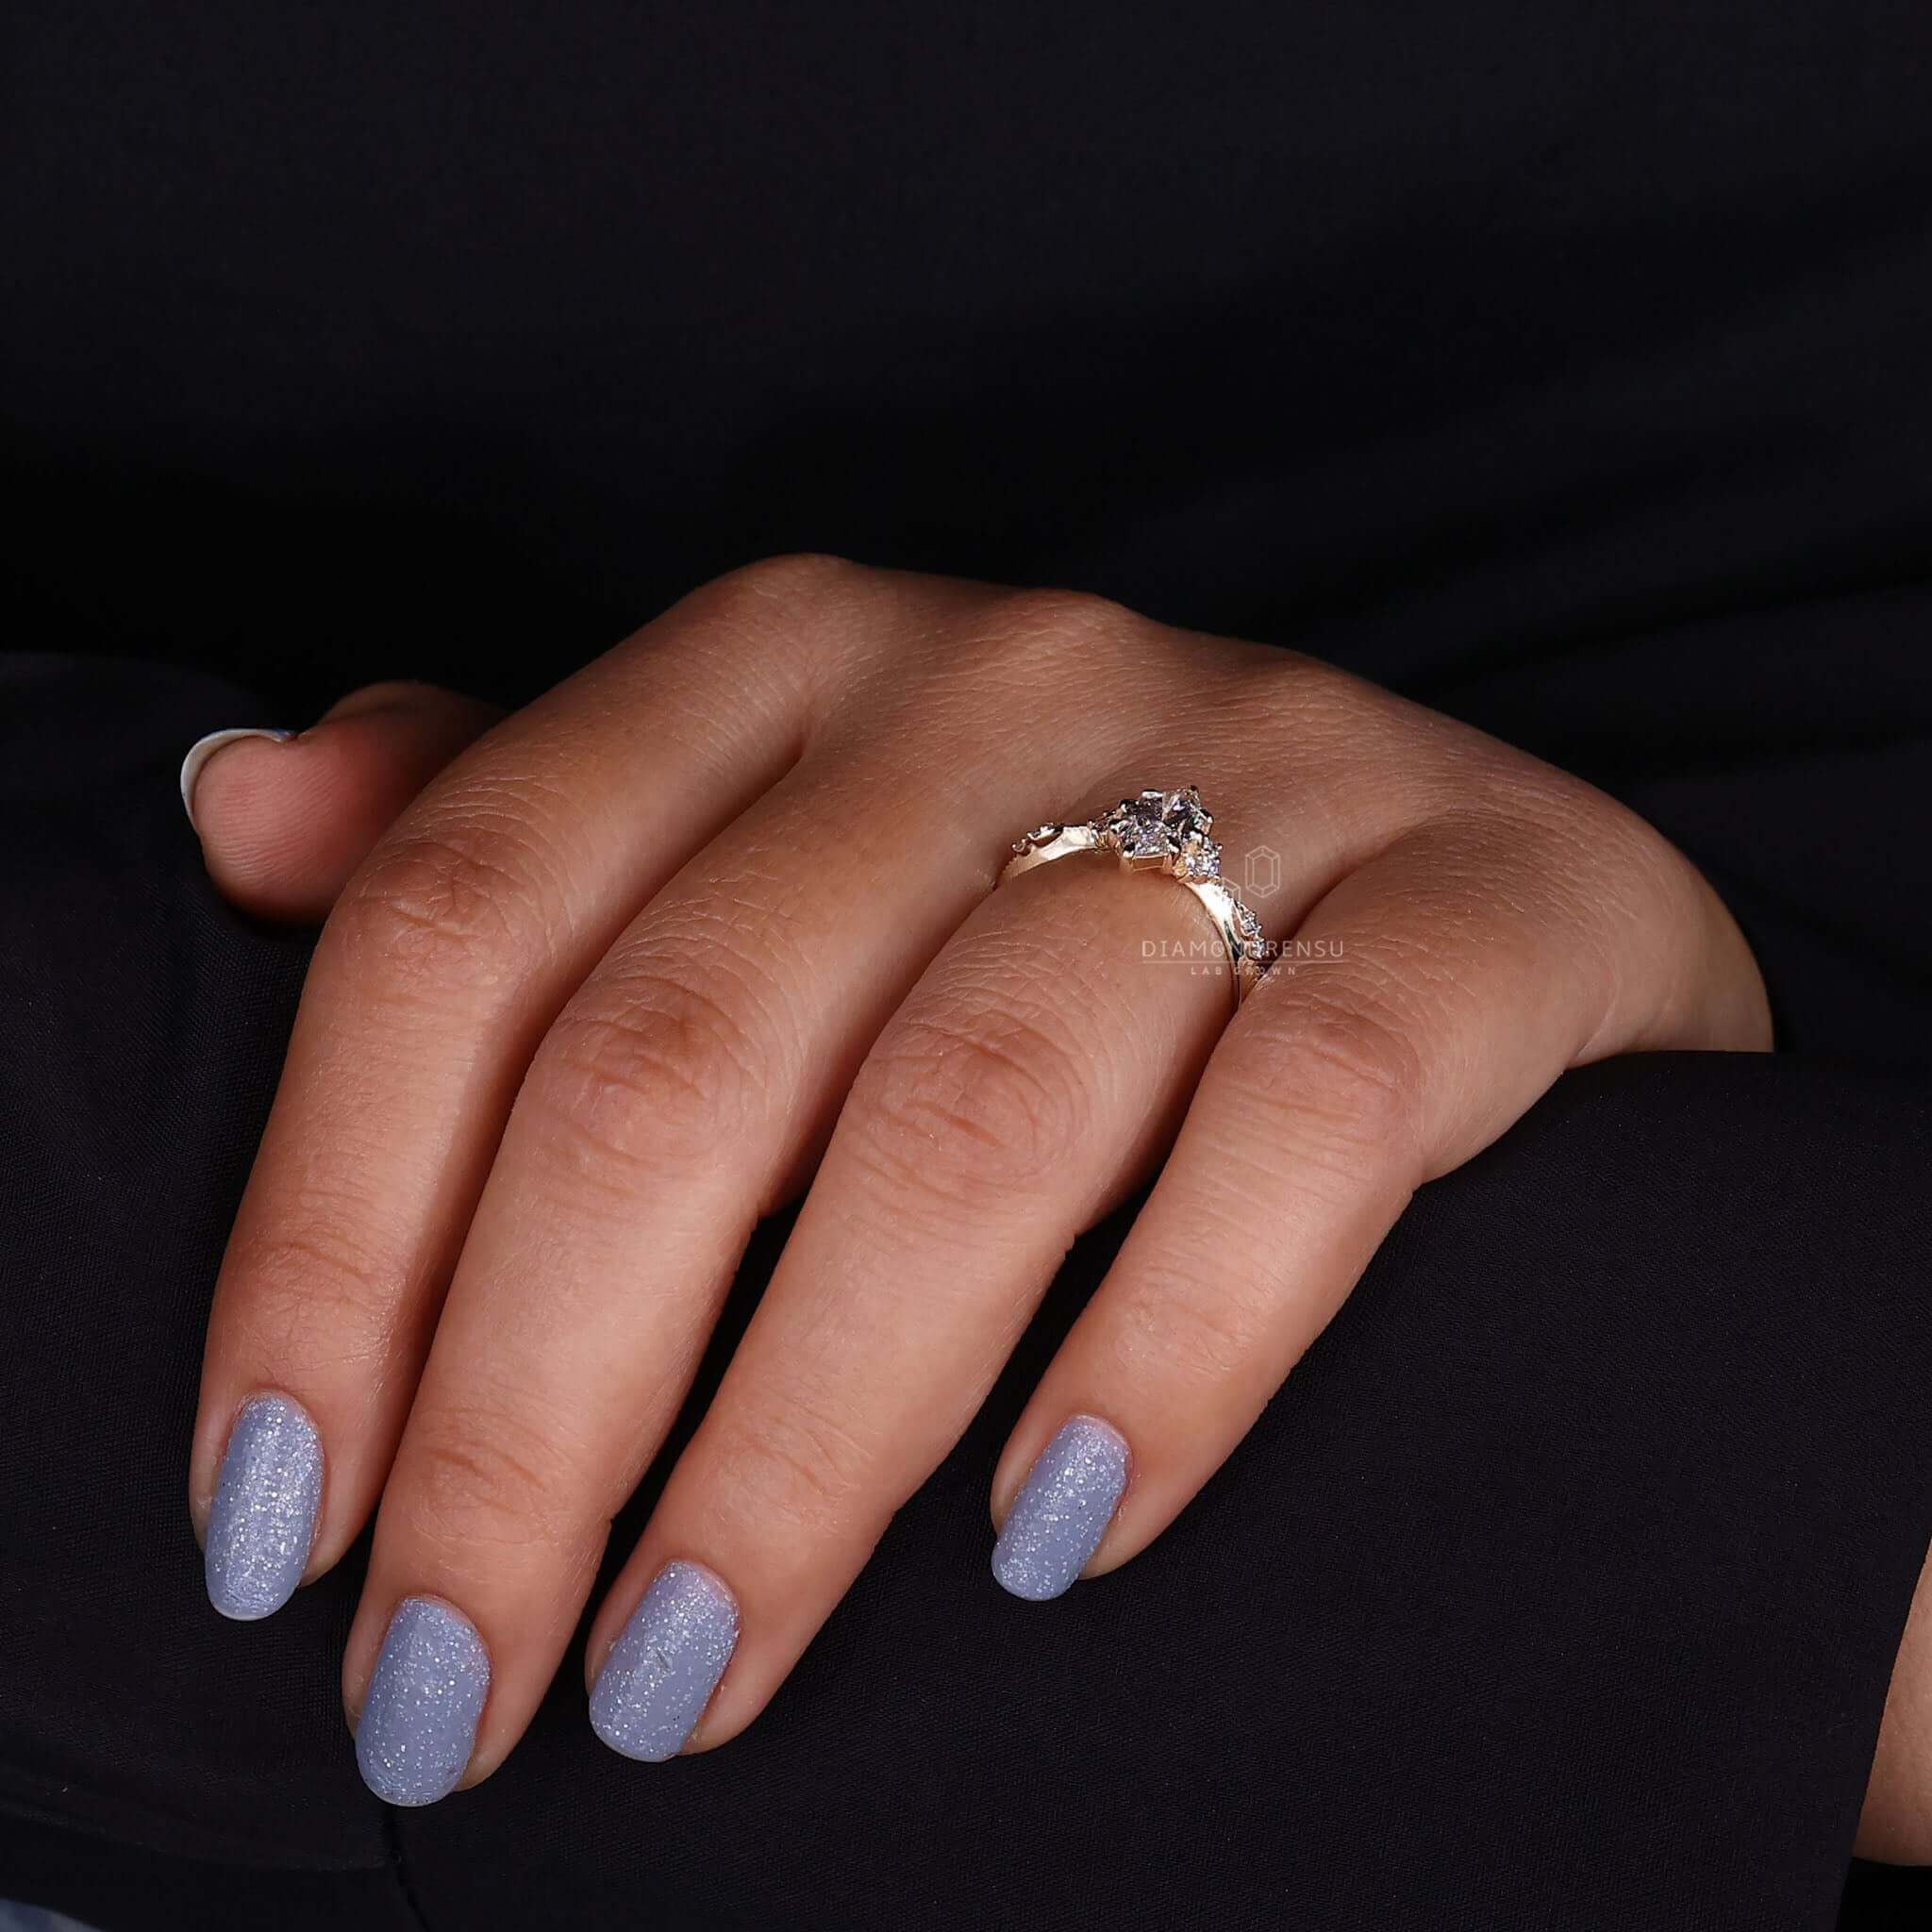 Woman's hand showing off a marquise cut engagement ring with a lab-grown diamond, featuring sidestones and claw prongs